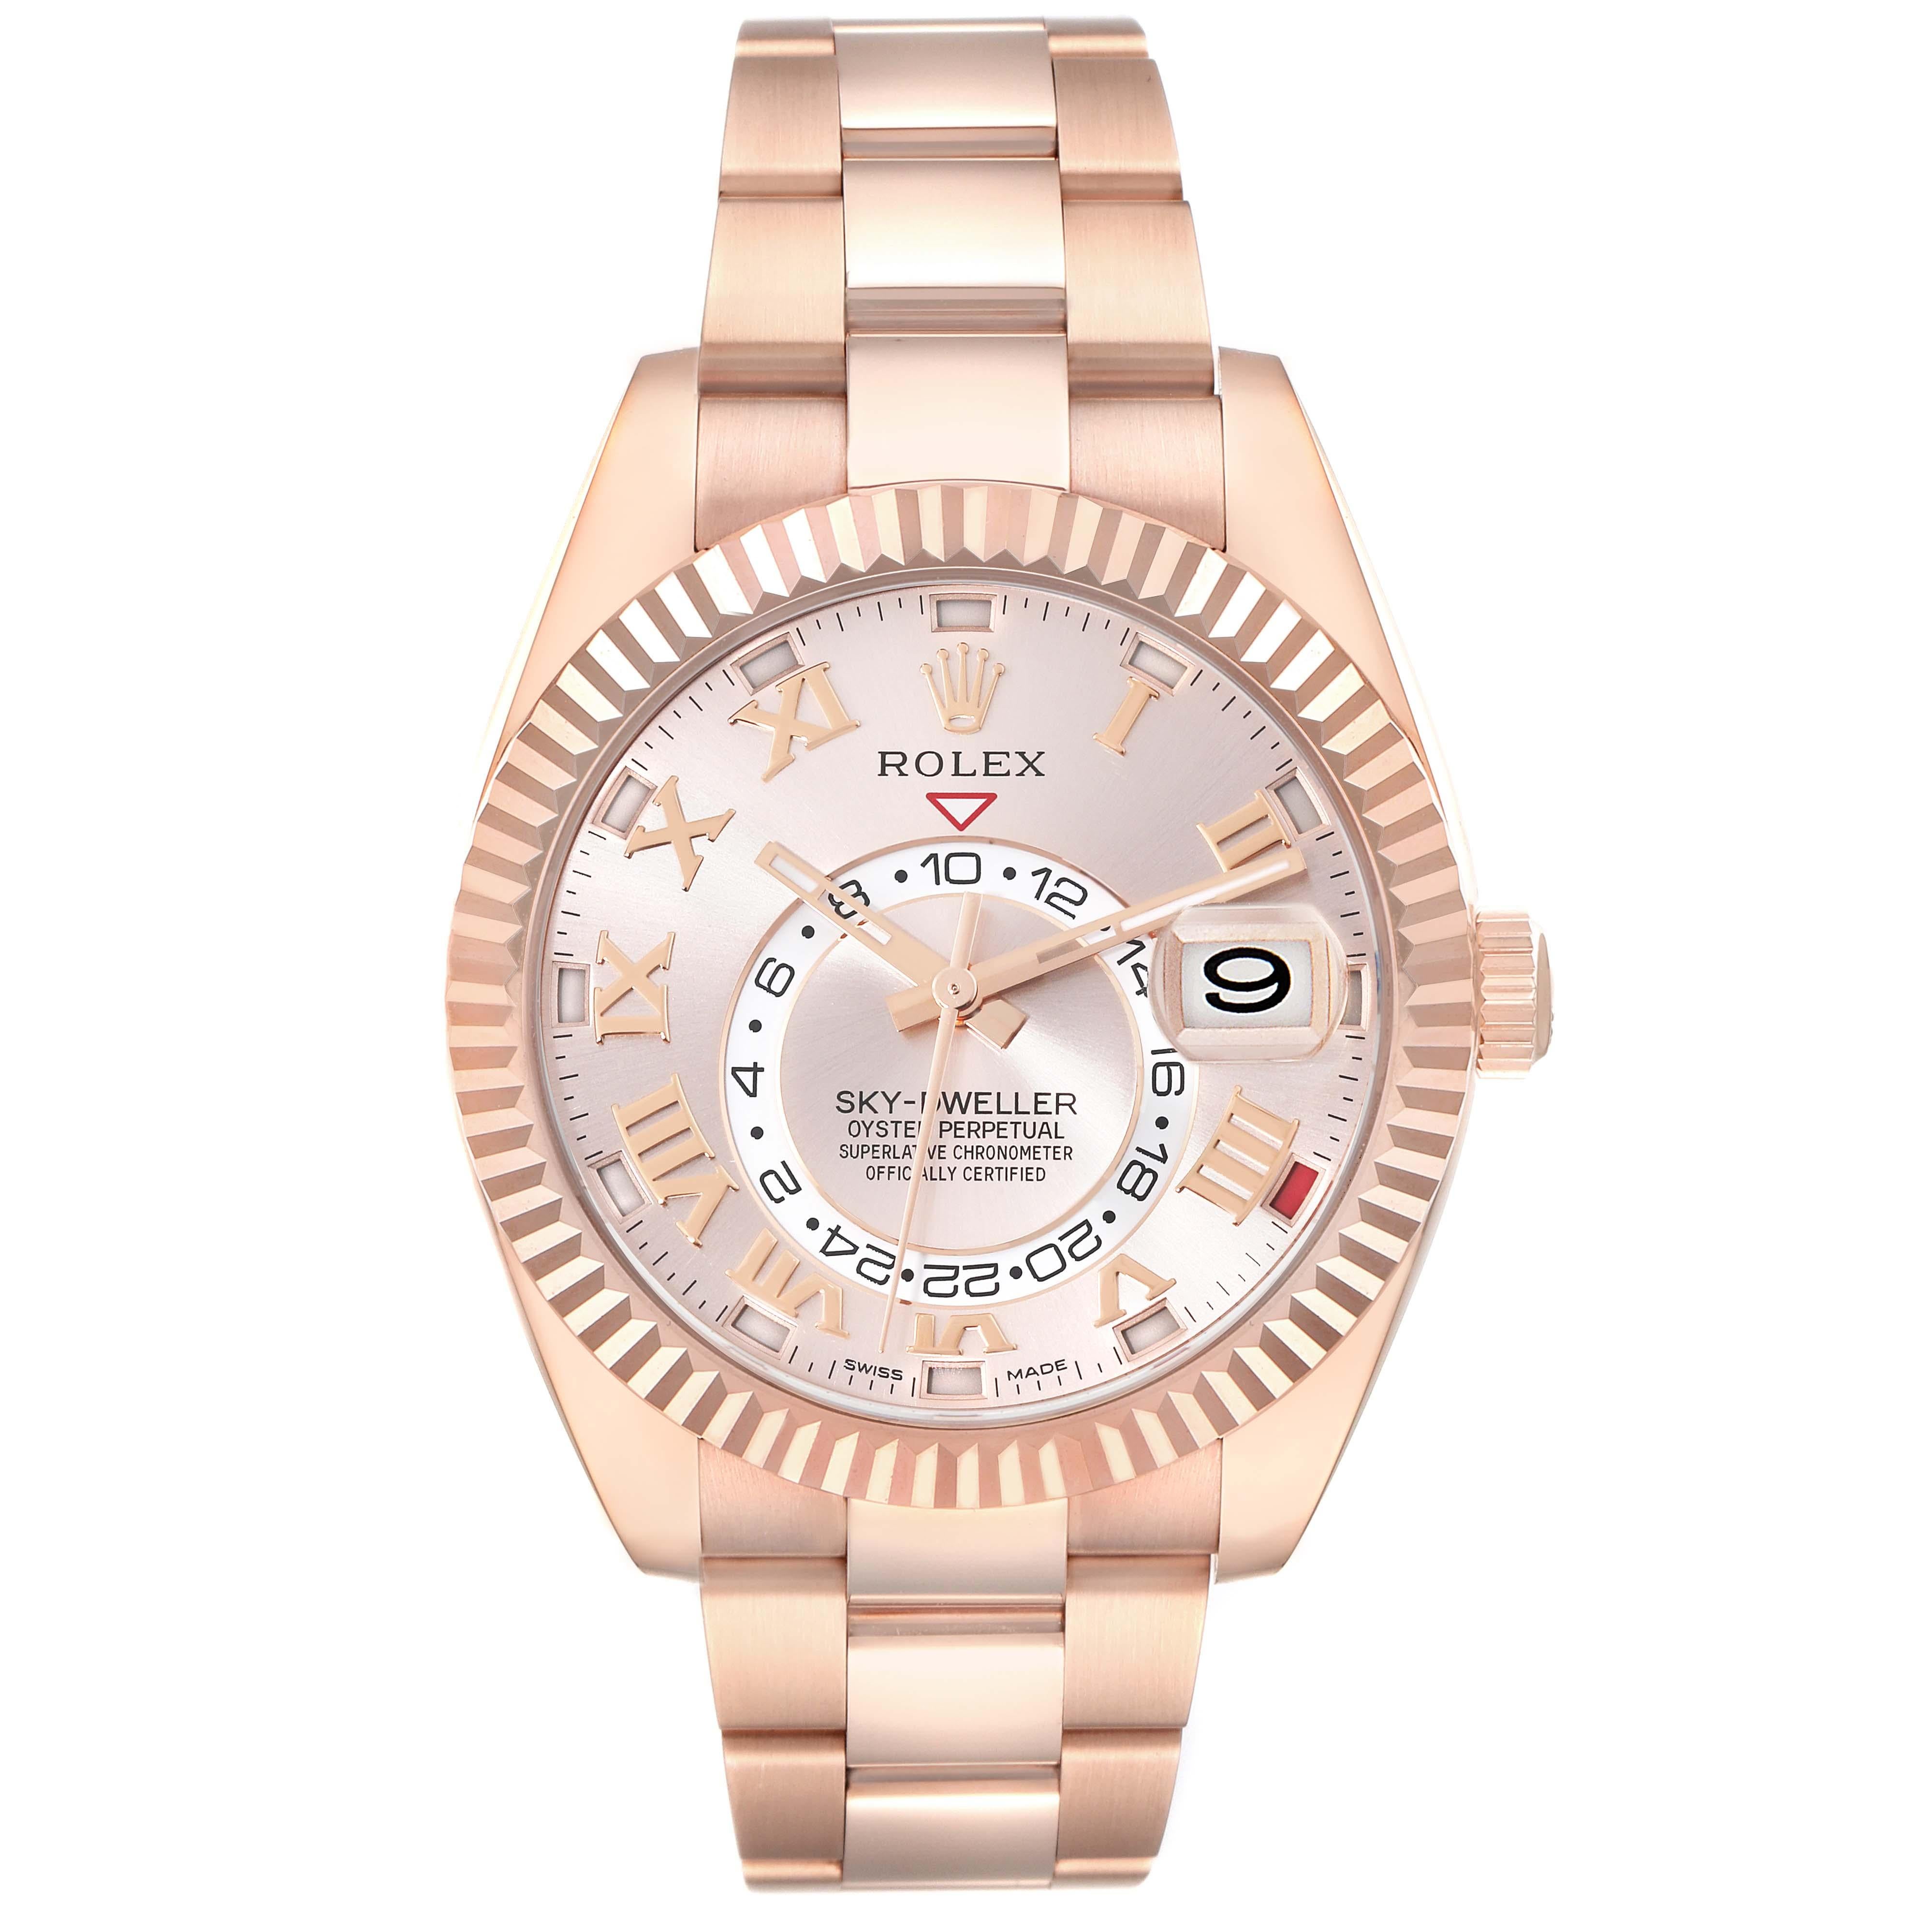 Rolex Sky-Dweller Rose Gold Sundust Dial Mens Watch 326935 Box Card. Officially certified chronometer self-winding movement. Dual time zones, annual calendar. Paramagnetic blue Parachrom hairspring. High-performance Paraflex shock absorbers. 18k